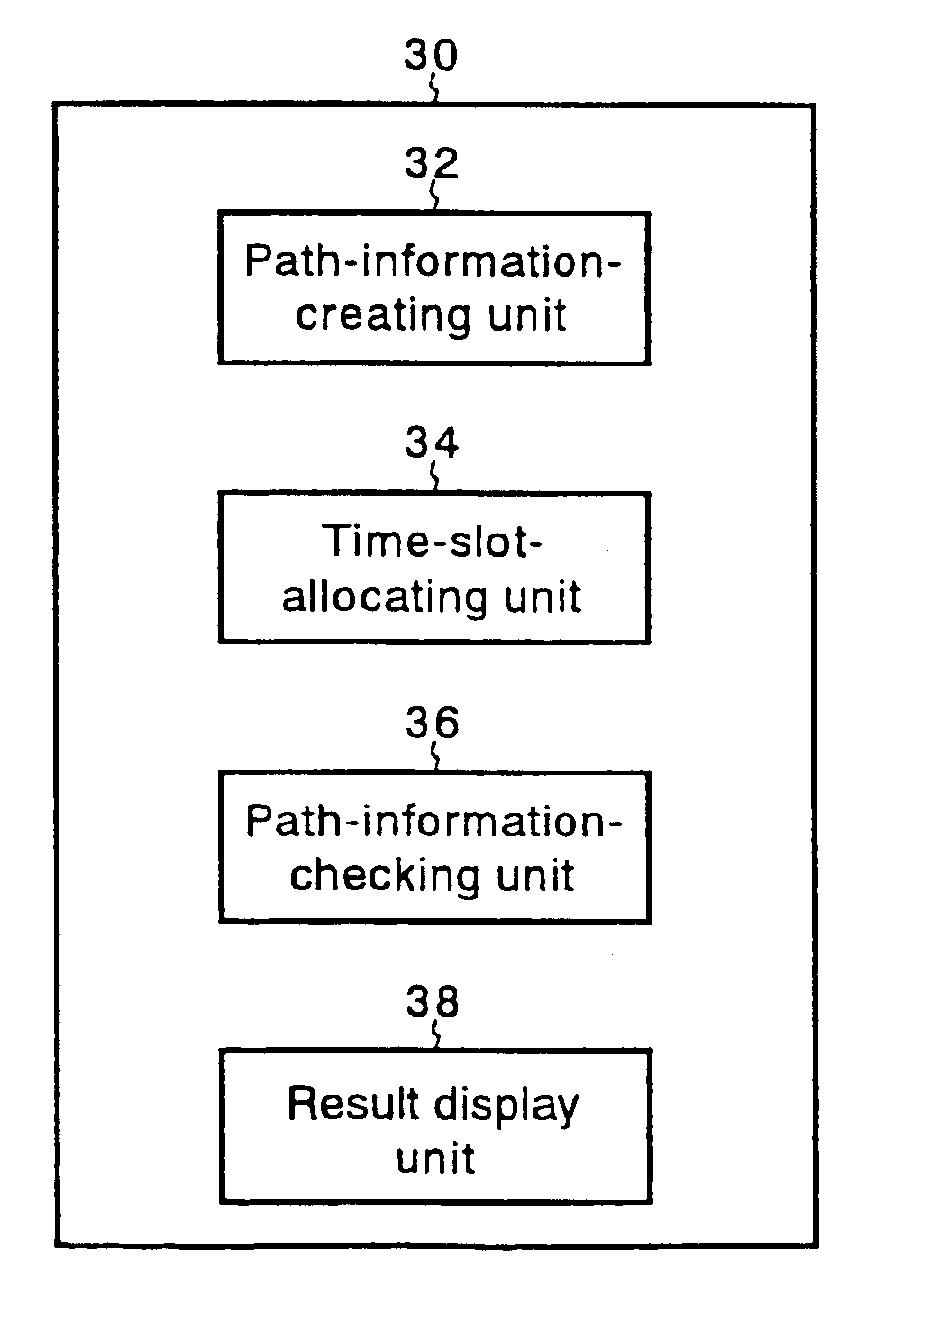 Intensive management apparatus for checking path validity in time-sharing multiplexing network